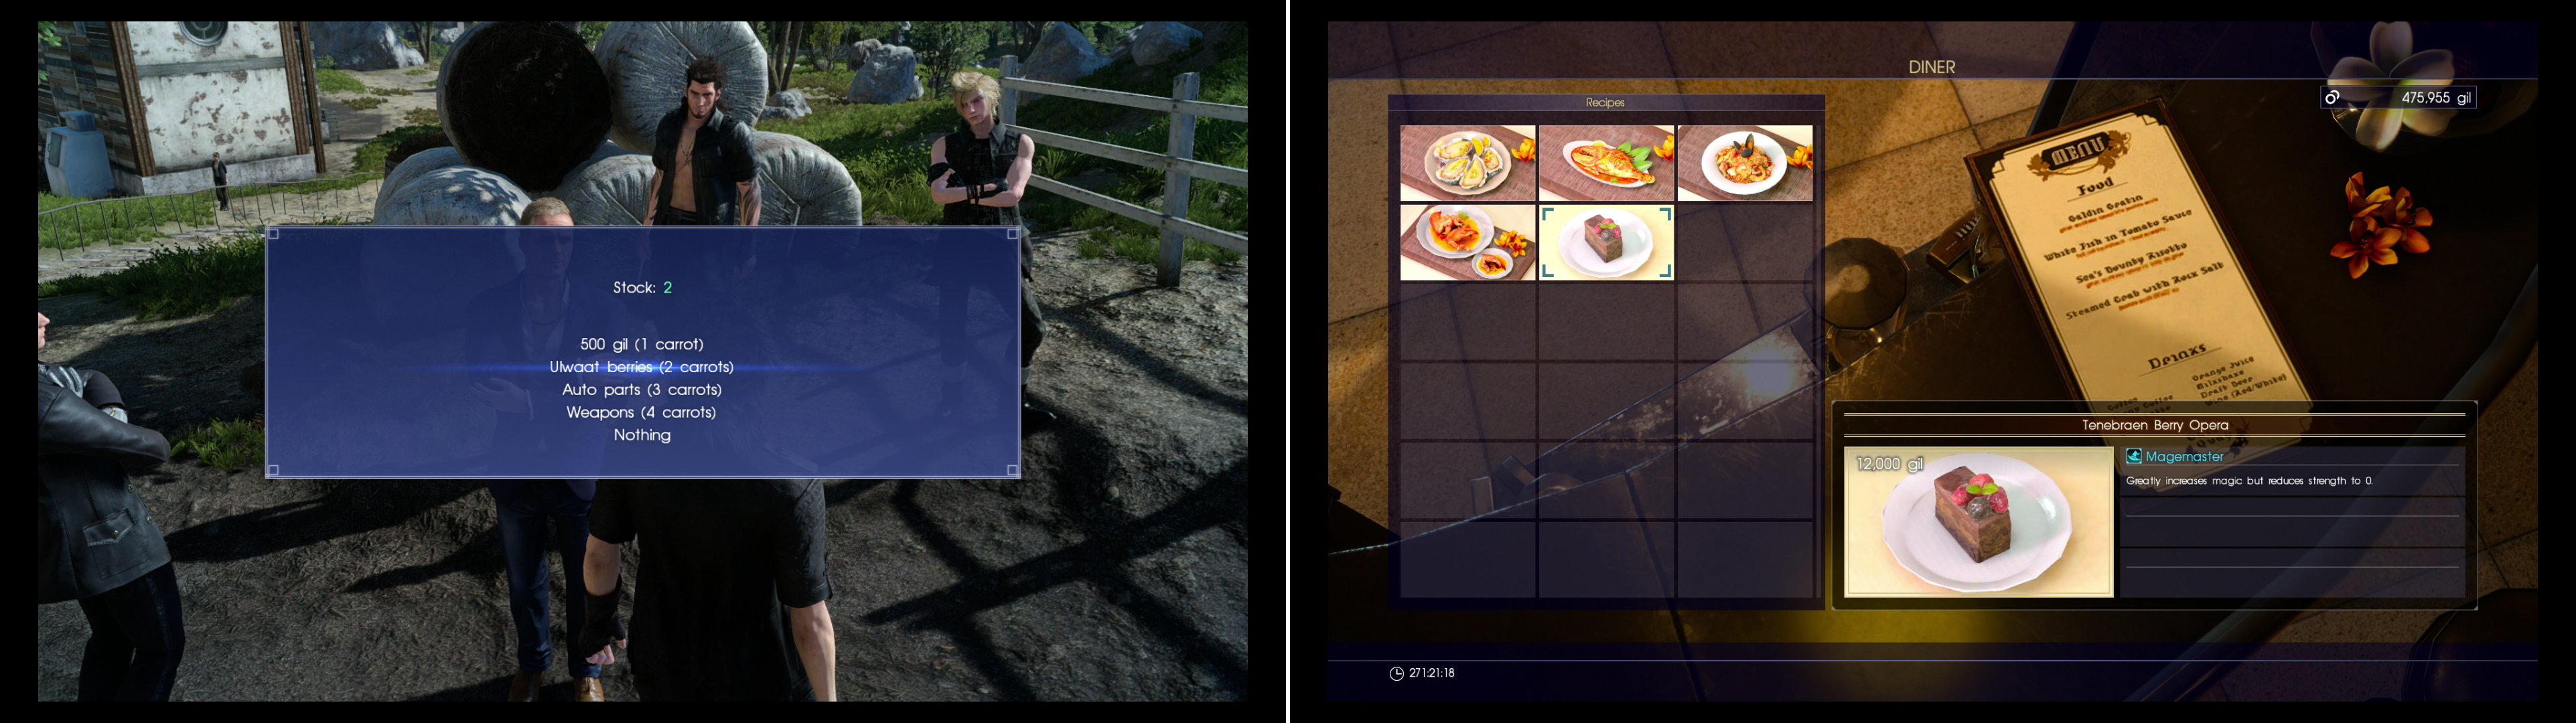 Trade two Caem Carrors for some Ulwaat Berries (left) and give them to Coctura to get access to a new meal (right).